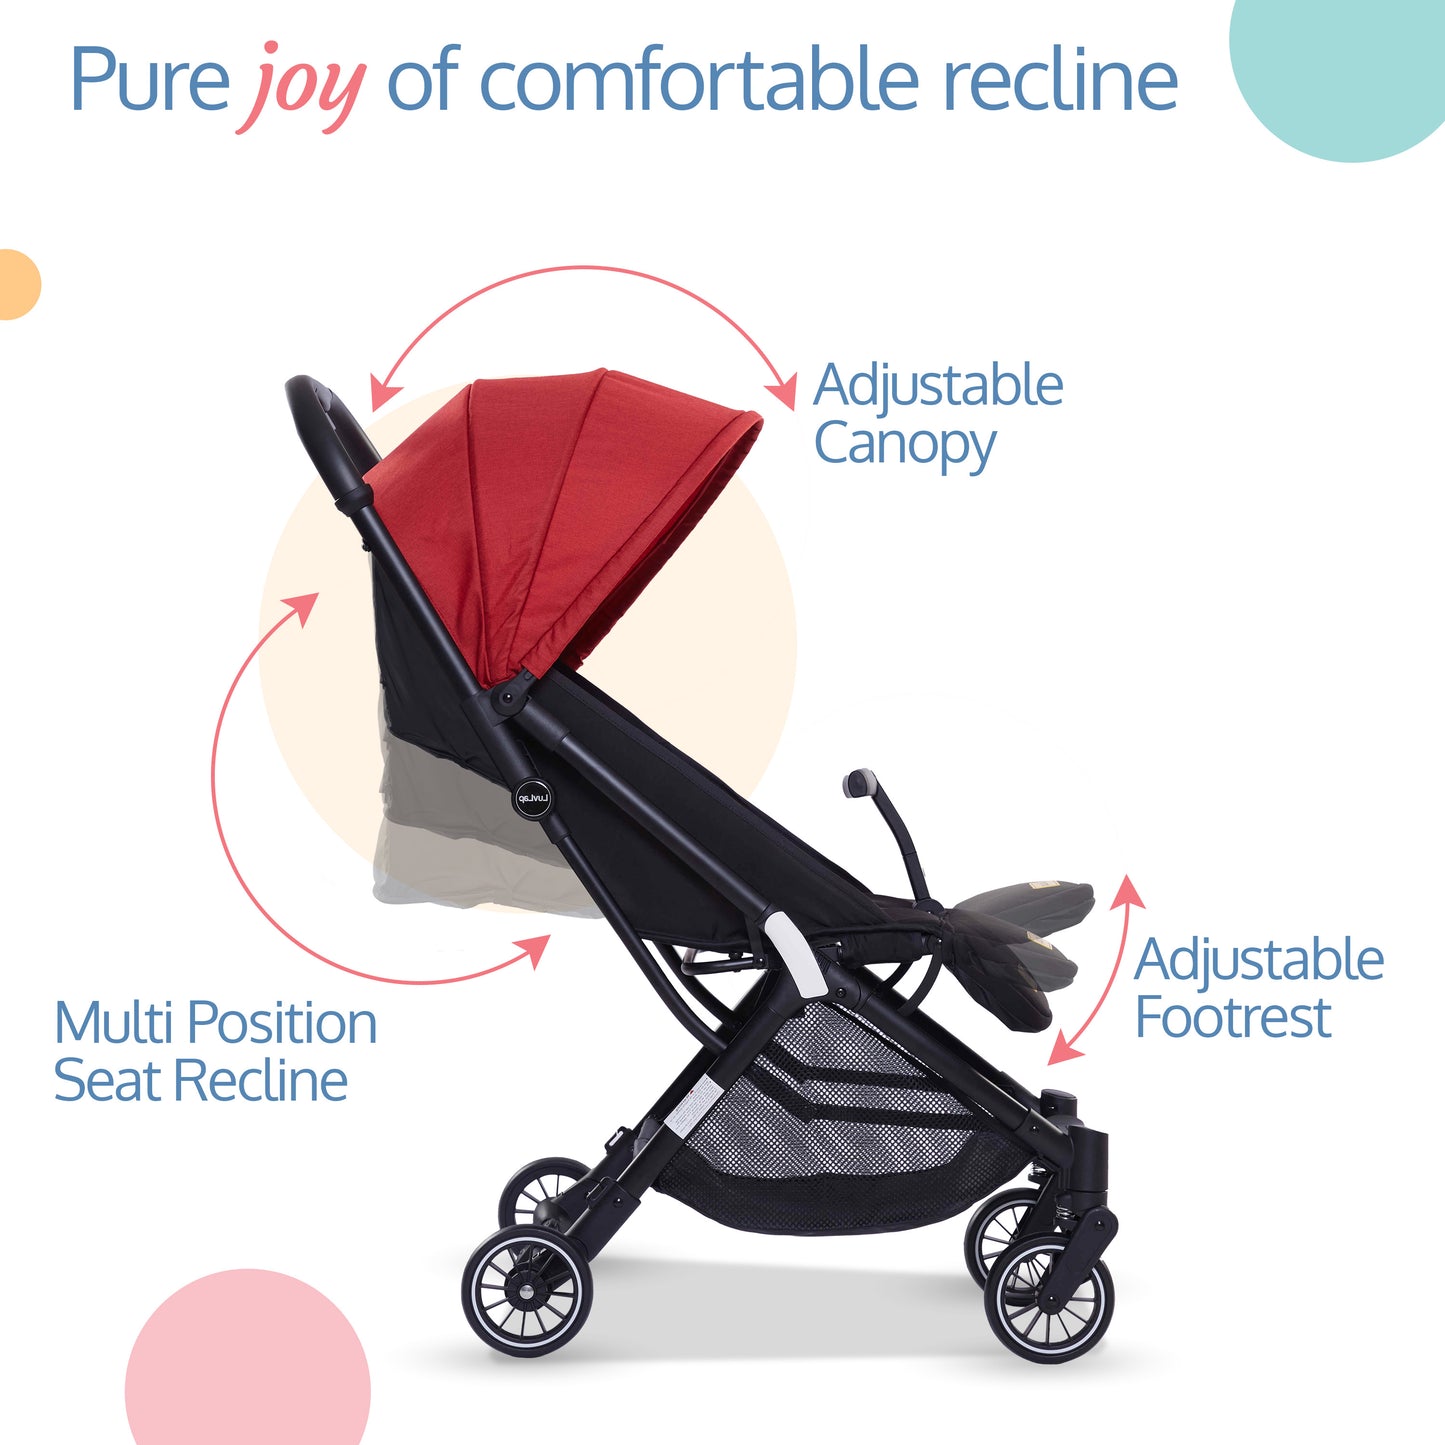 Urbane Baby Stroller/Pram with 5 Point Safety Harness,Easy Fold,Extended Canopy,Multi Level Recline,Looking Window,Easy Assembly,6 Month + (Red&Black)